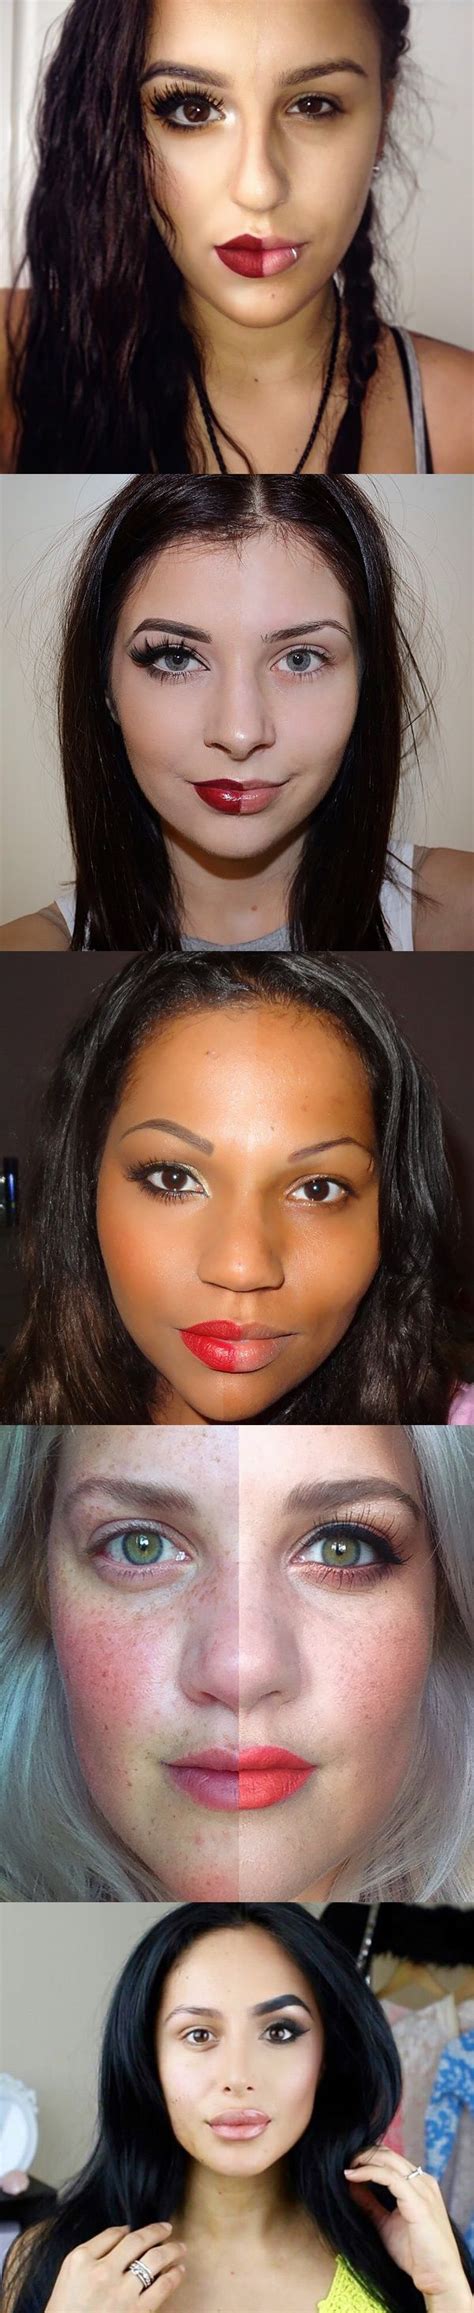 Women Post Selfies With Half Made Up Faces To Fight Makeup Shaming Makeup Makeup Is Life